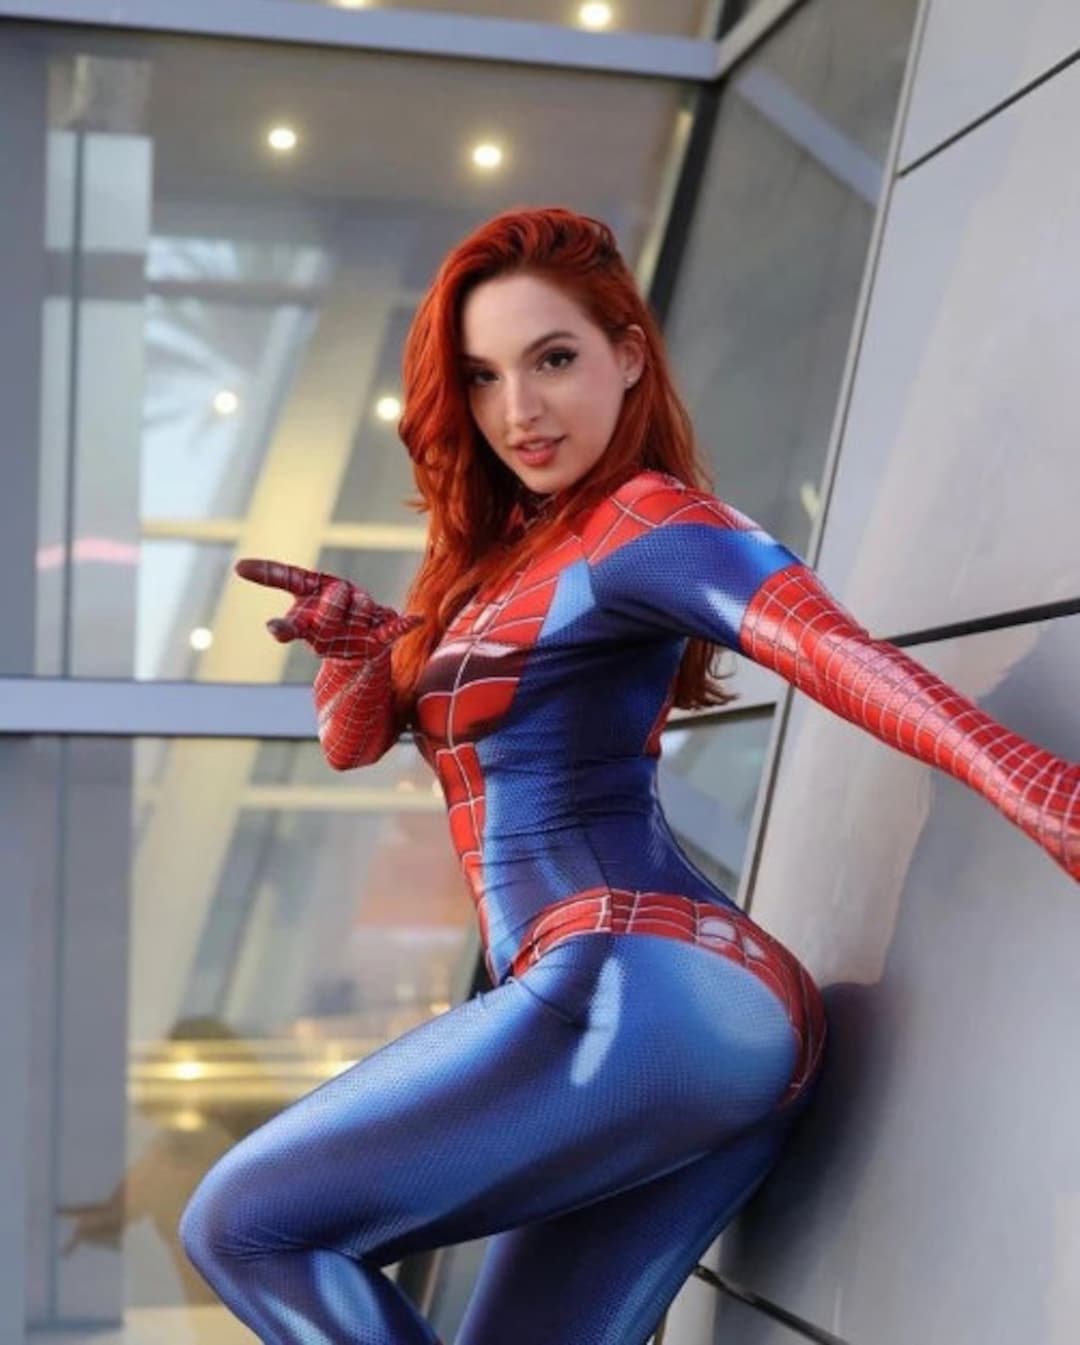 Spider Girl Cosplay Porn - Sexy Spider Girl Cosplay Homecoming Spider Halloween Costume - Etsy Israel